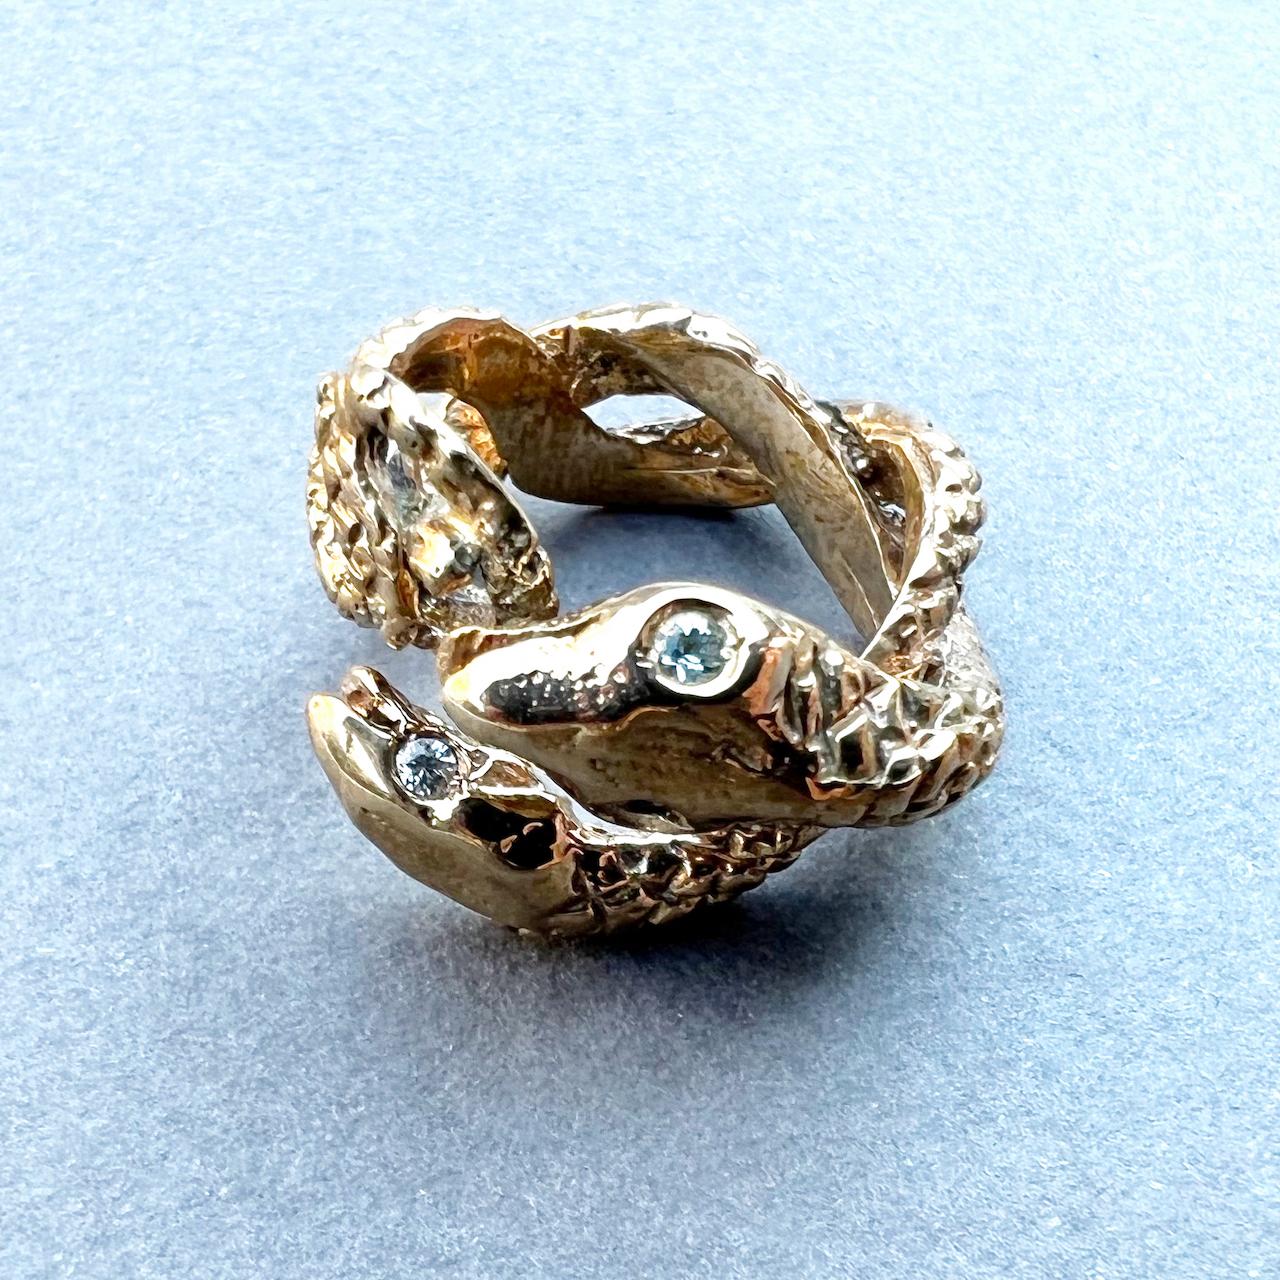 Animal jewelry Aquamarine Snake Ring Bronze Cocktail Ring J Dauphin For Sale 3